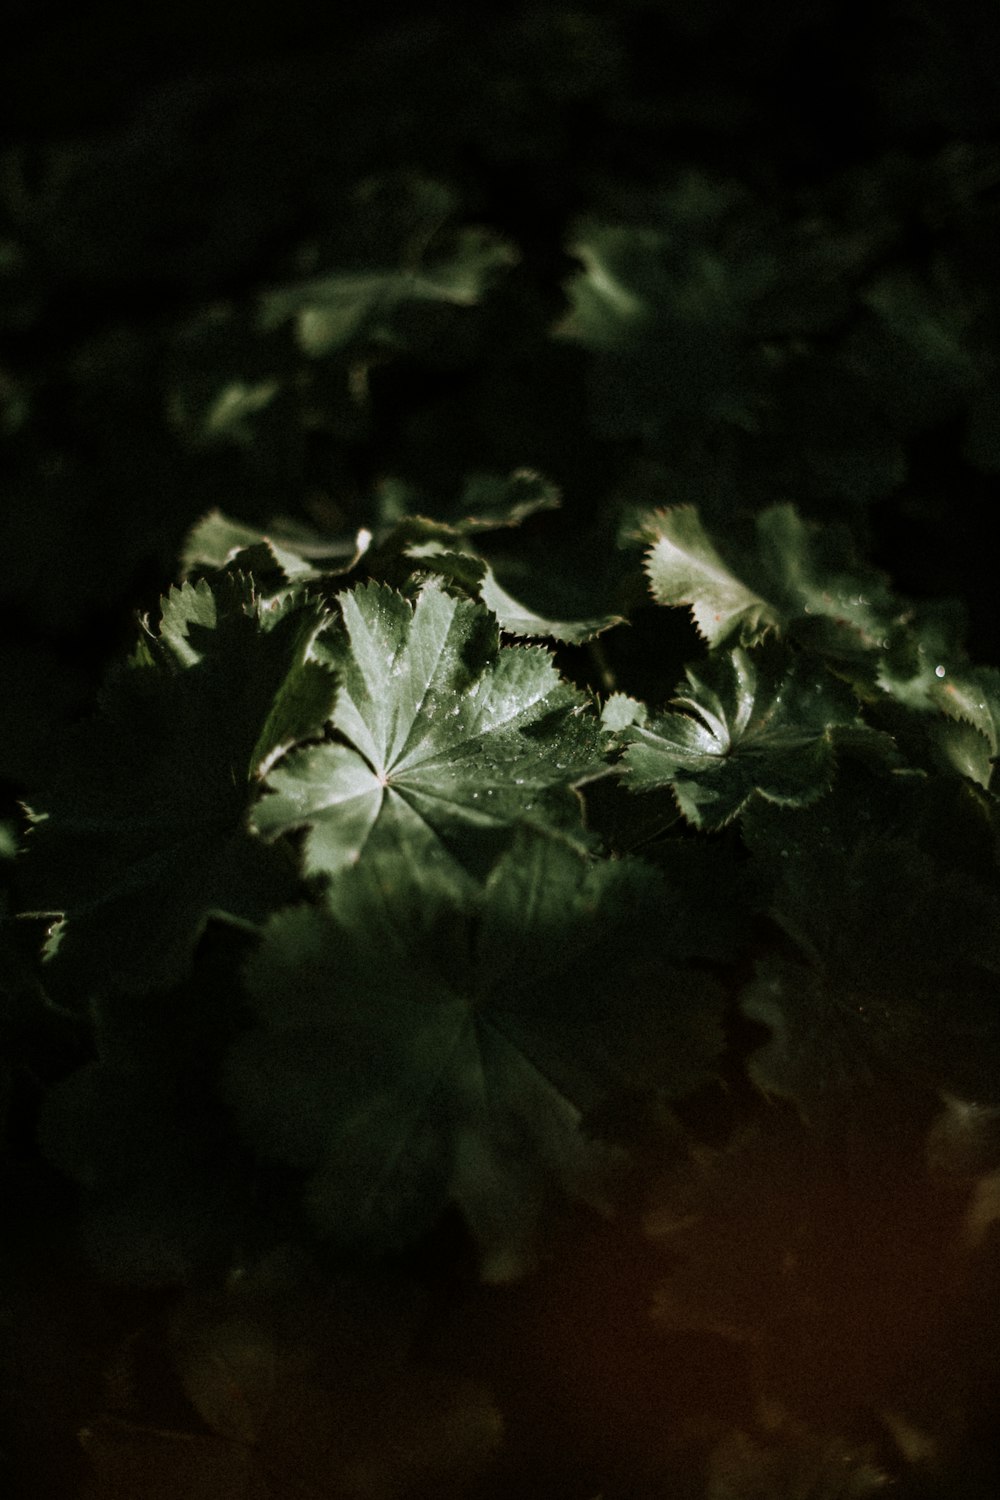 a leafy plant is shown in the dark